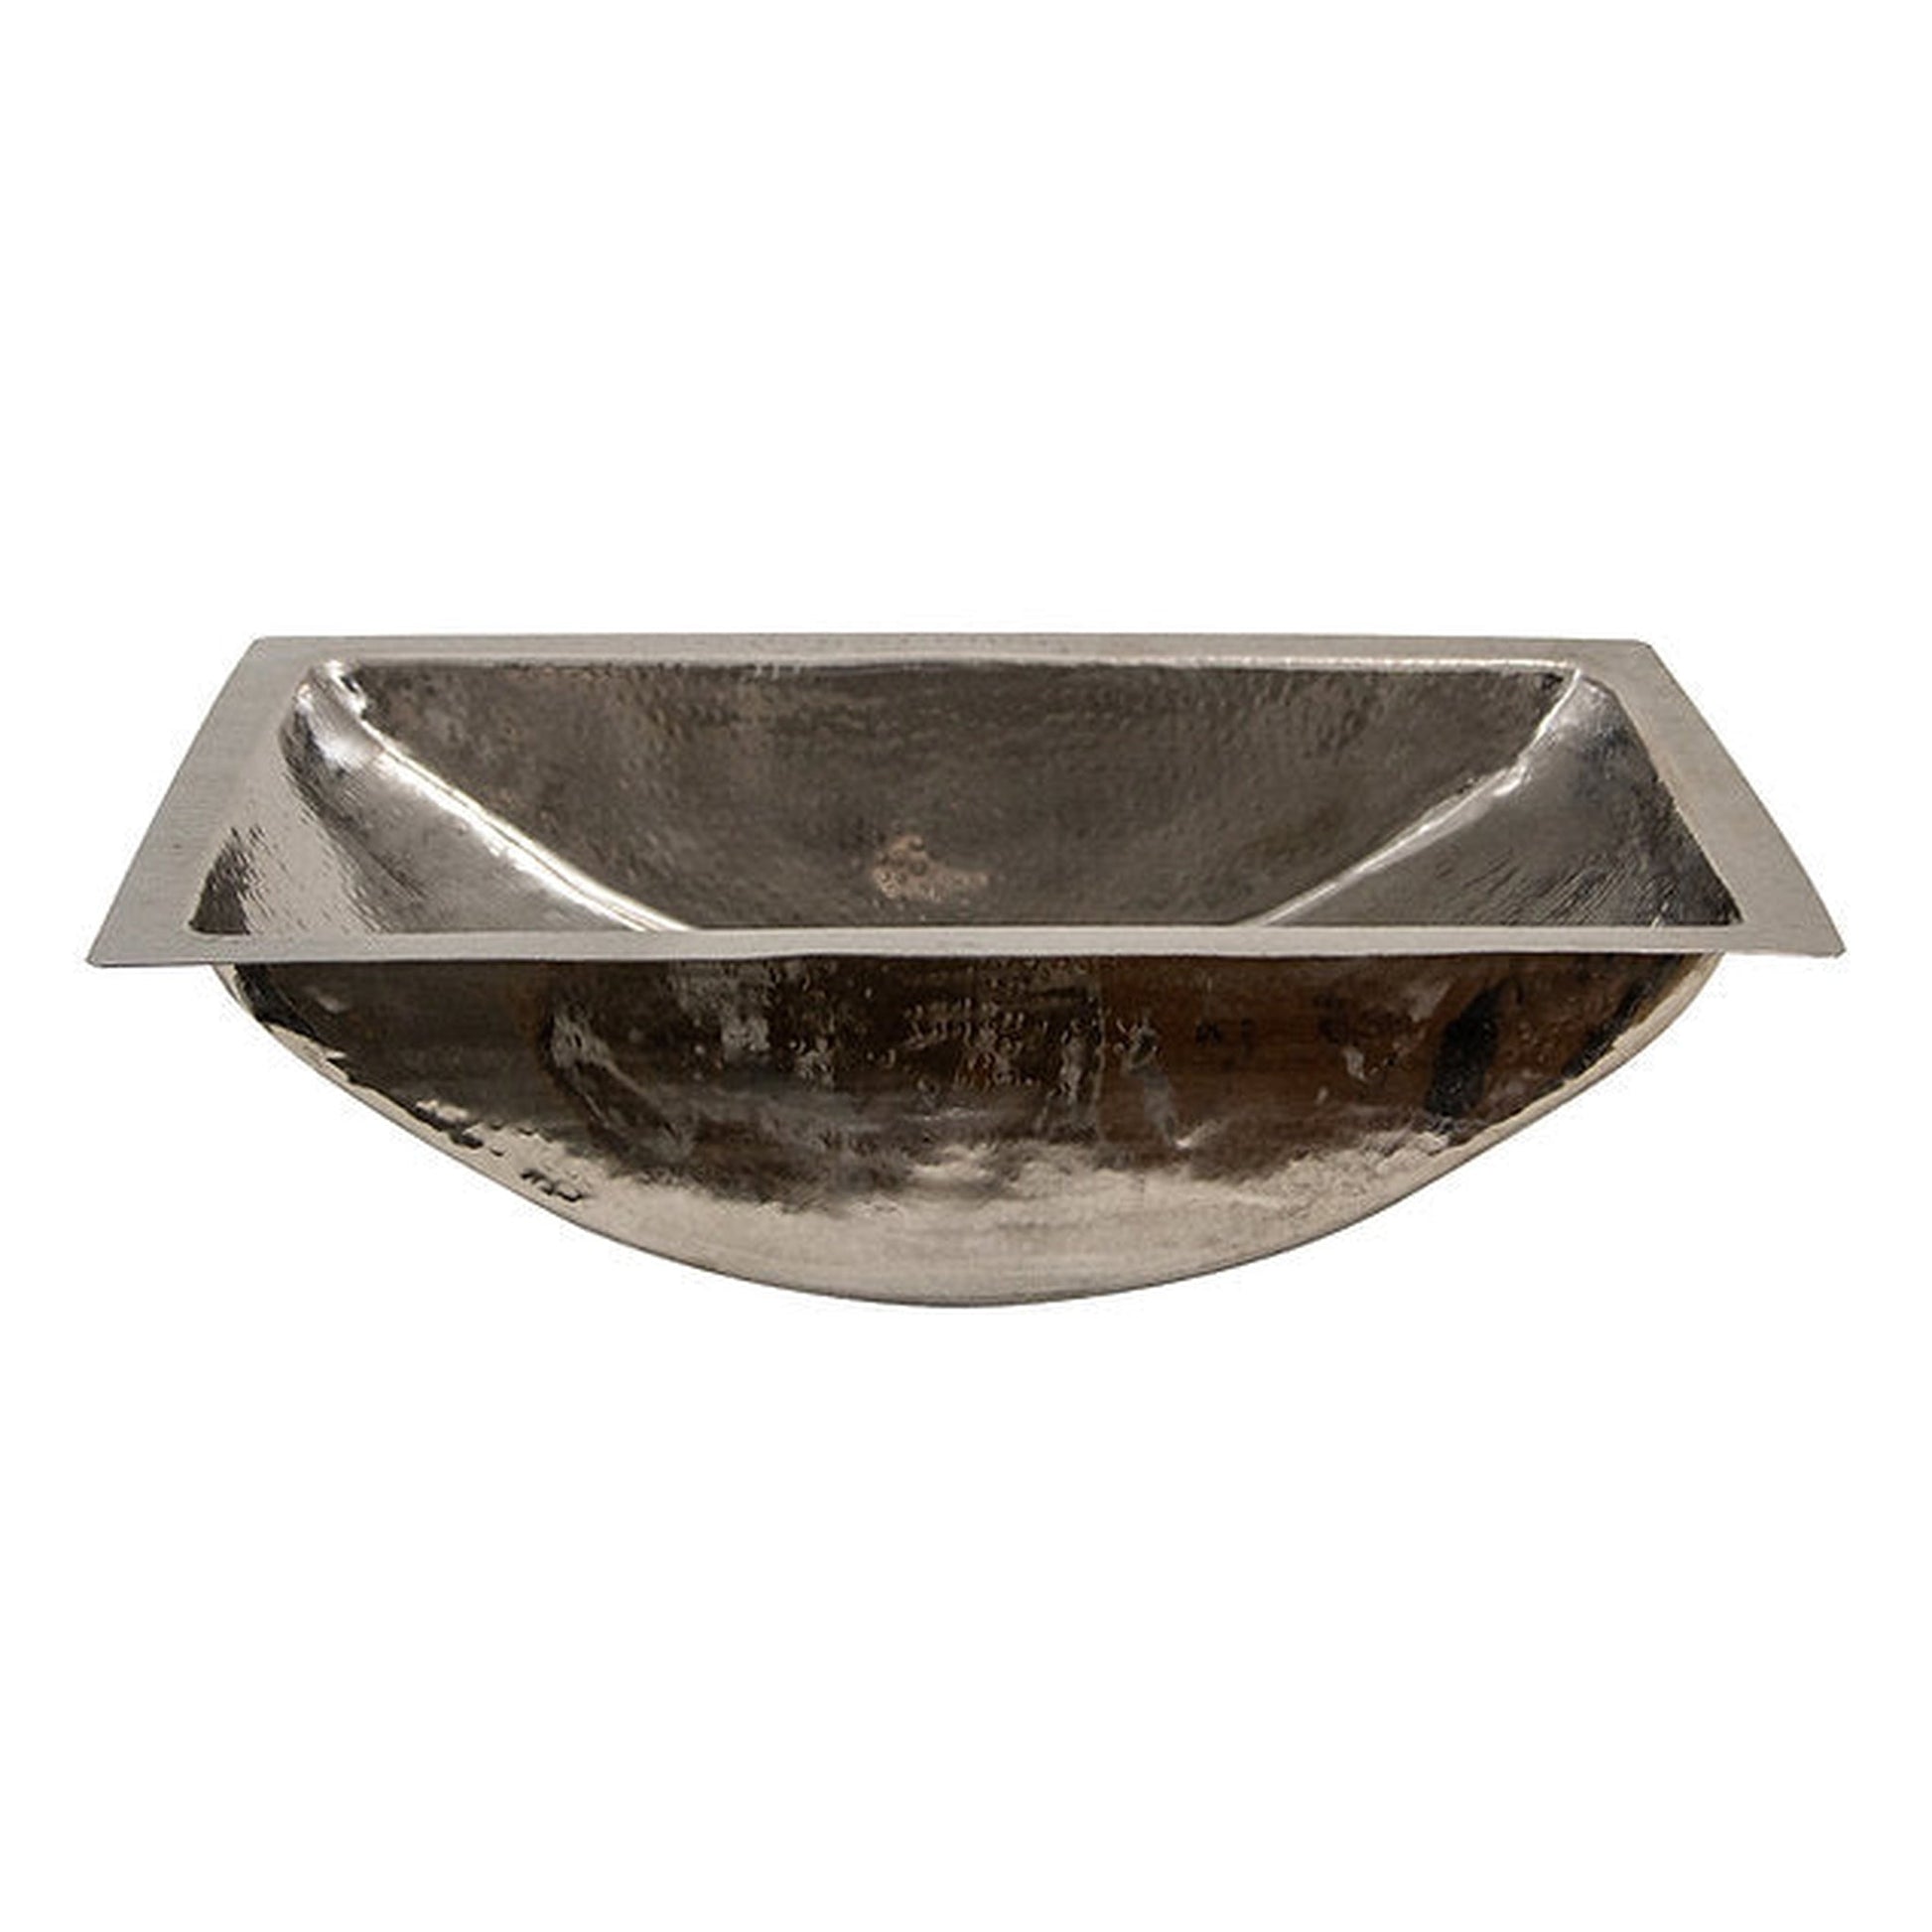 Nantucket Sinks Brightwork Home 24" W x 16" D" Rectangular Hand Hammered Polished Stainless Steel Dualmount Sink